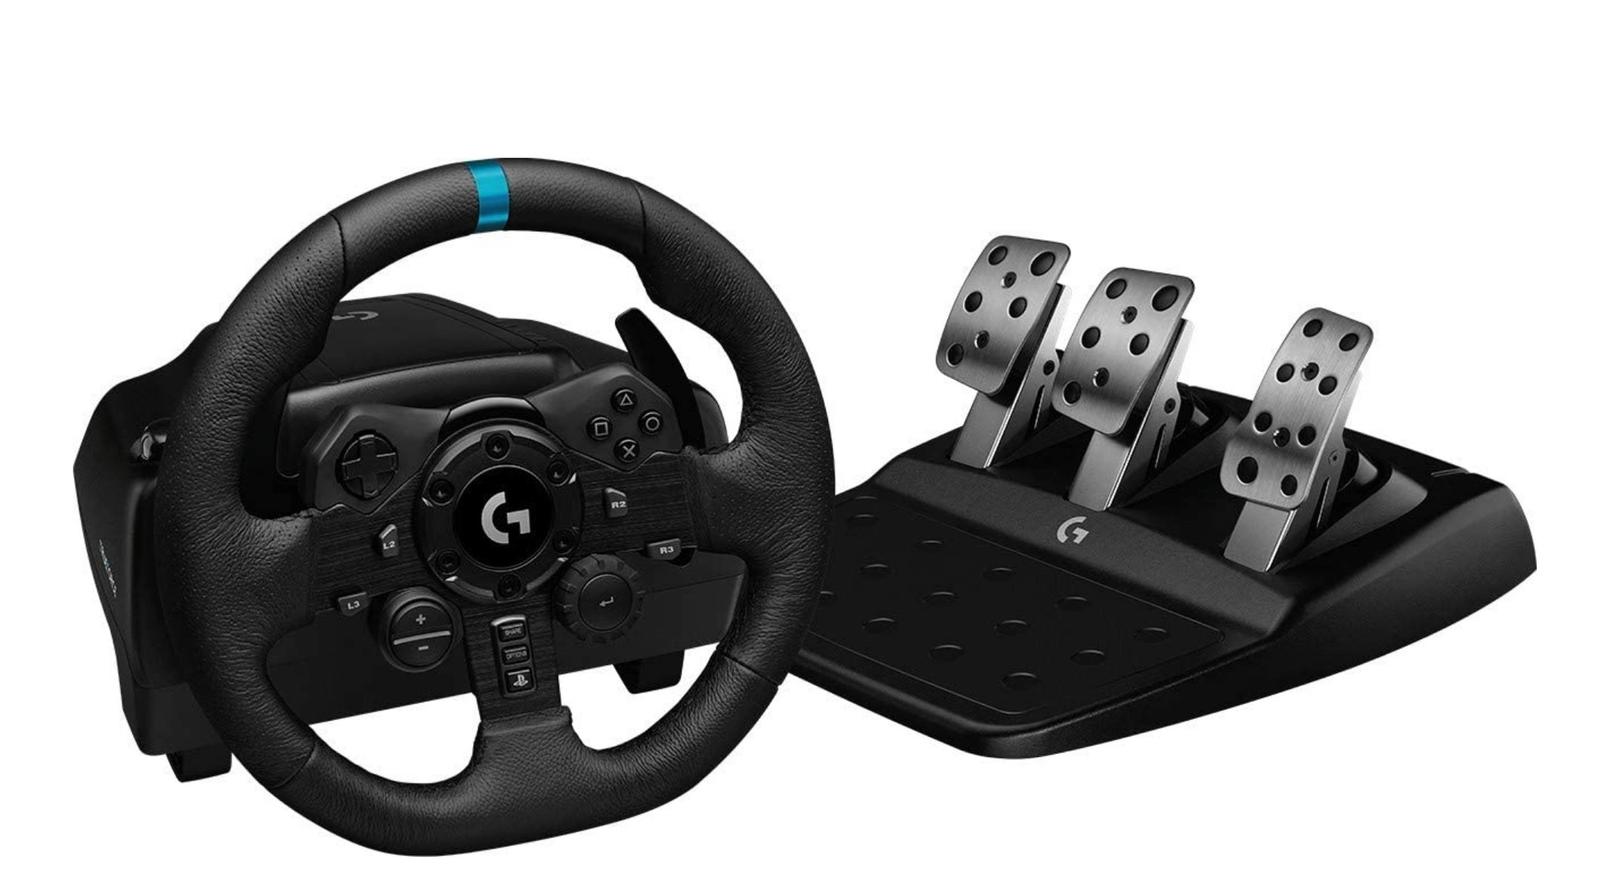 Logitech G923 product image of a black racing wheel and a black and silver metal pedal set.